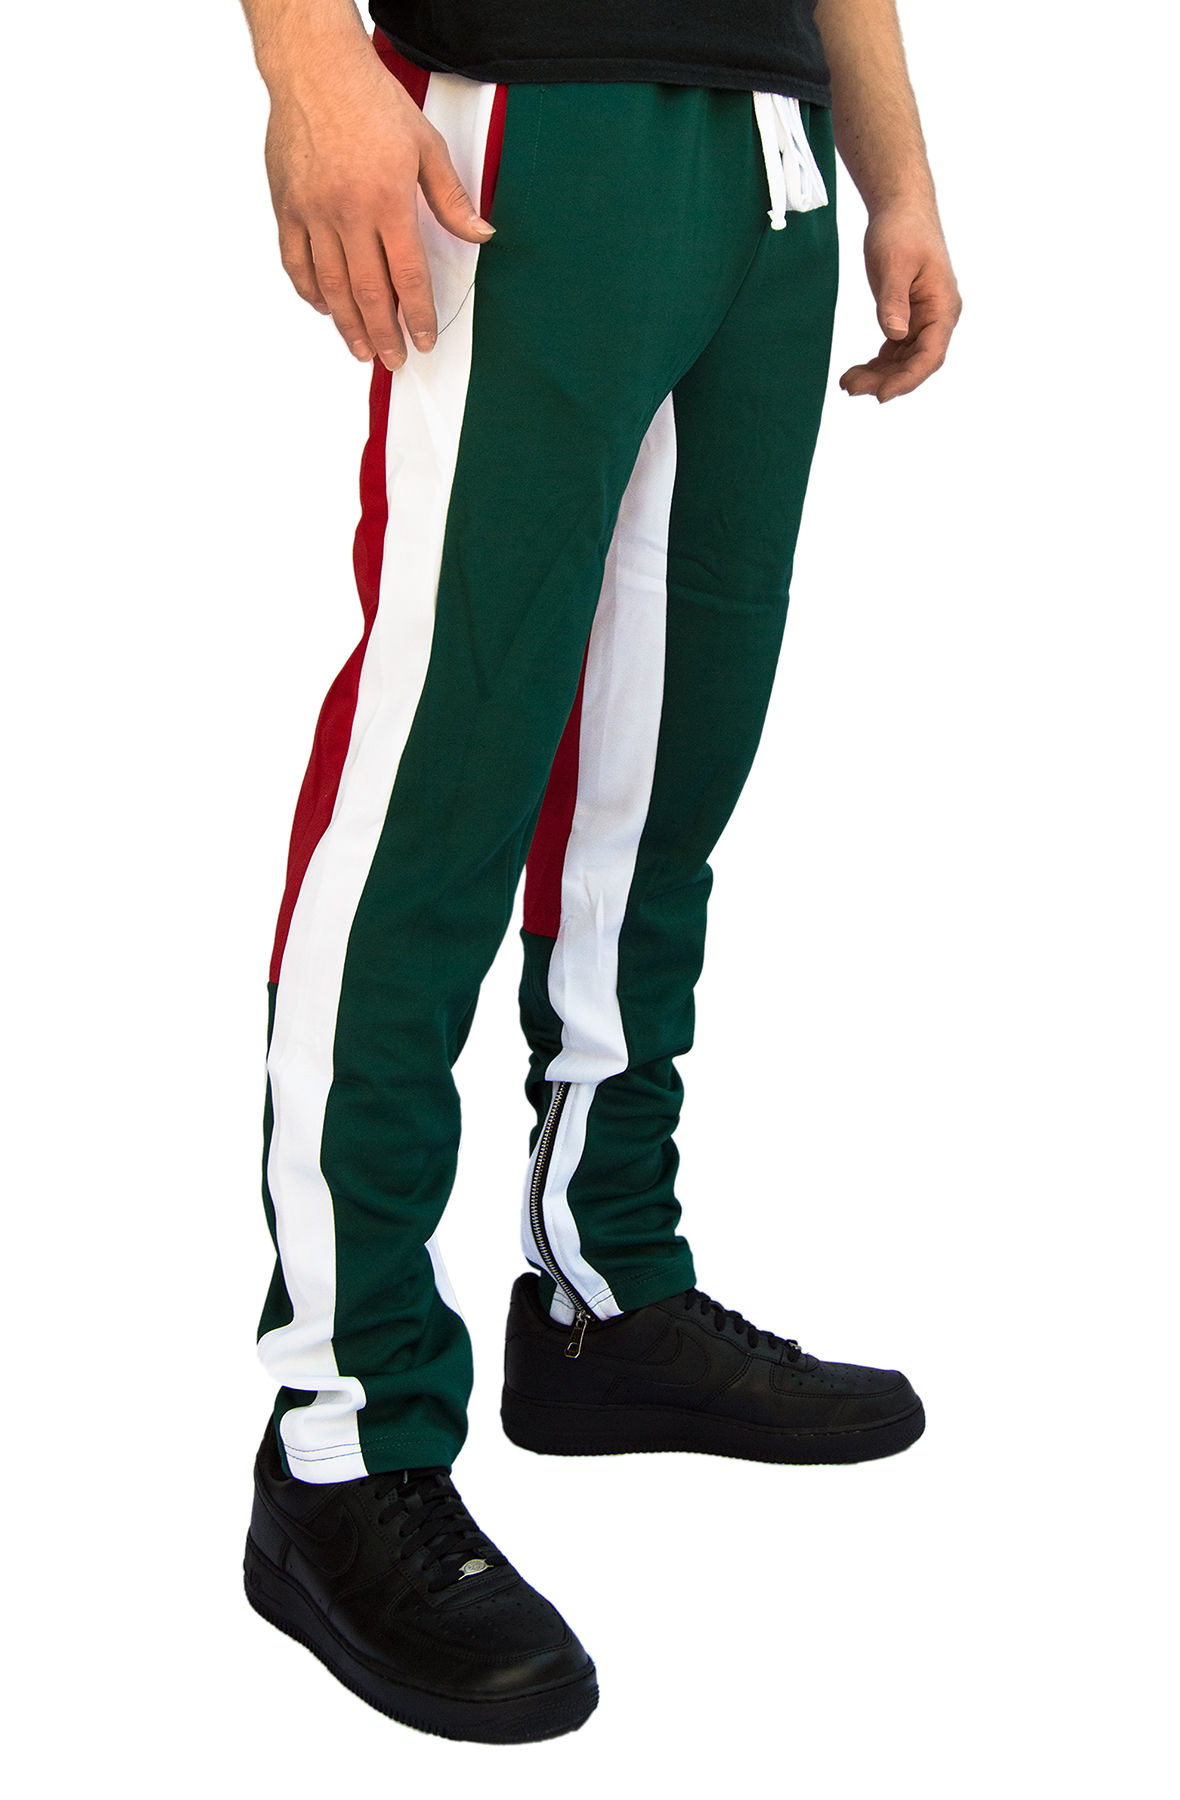 Green and Red Zipper Track Pants with 